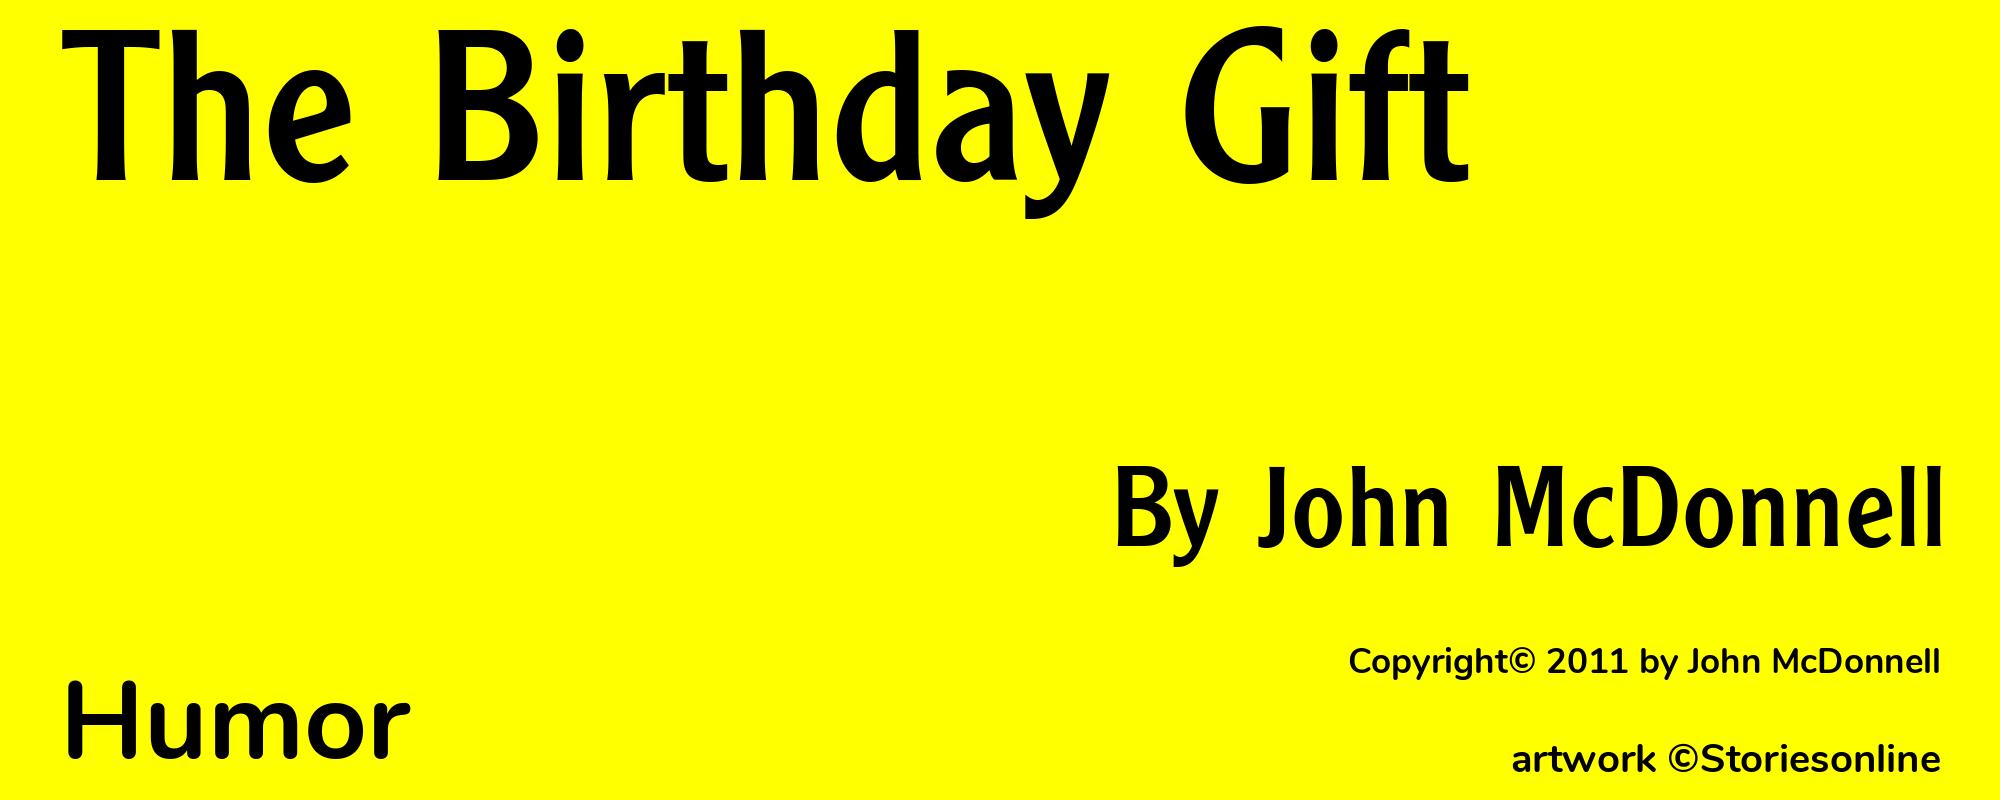 The Birthday Gift - Cover